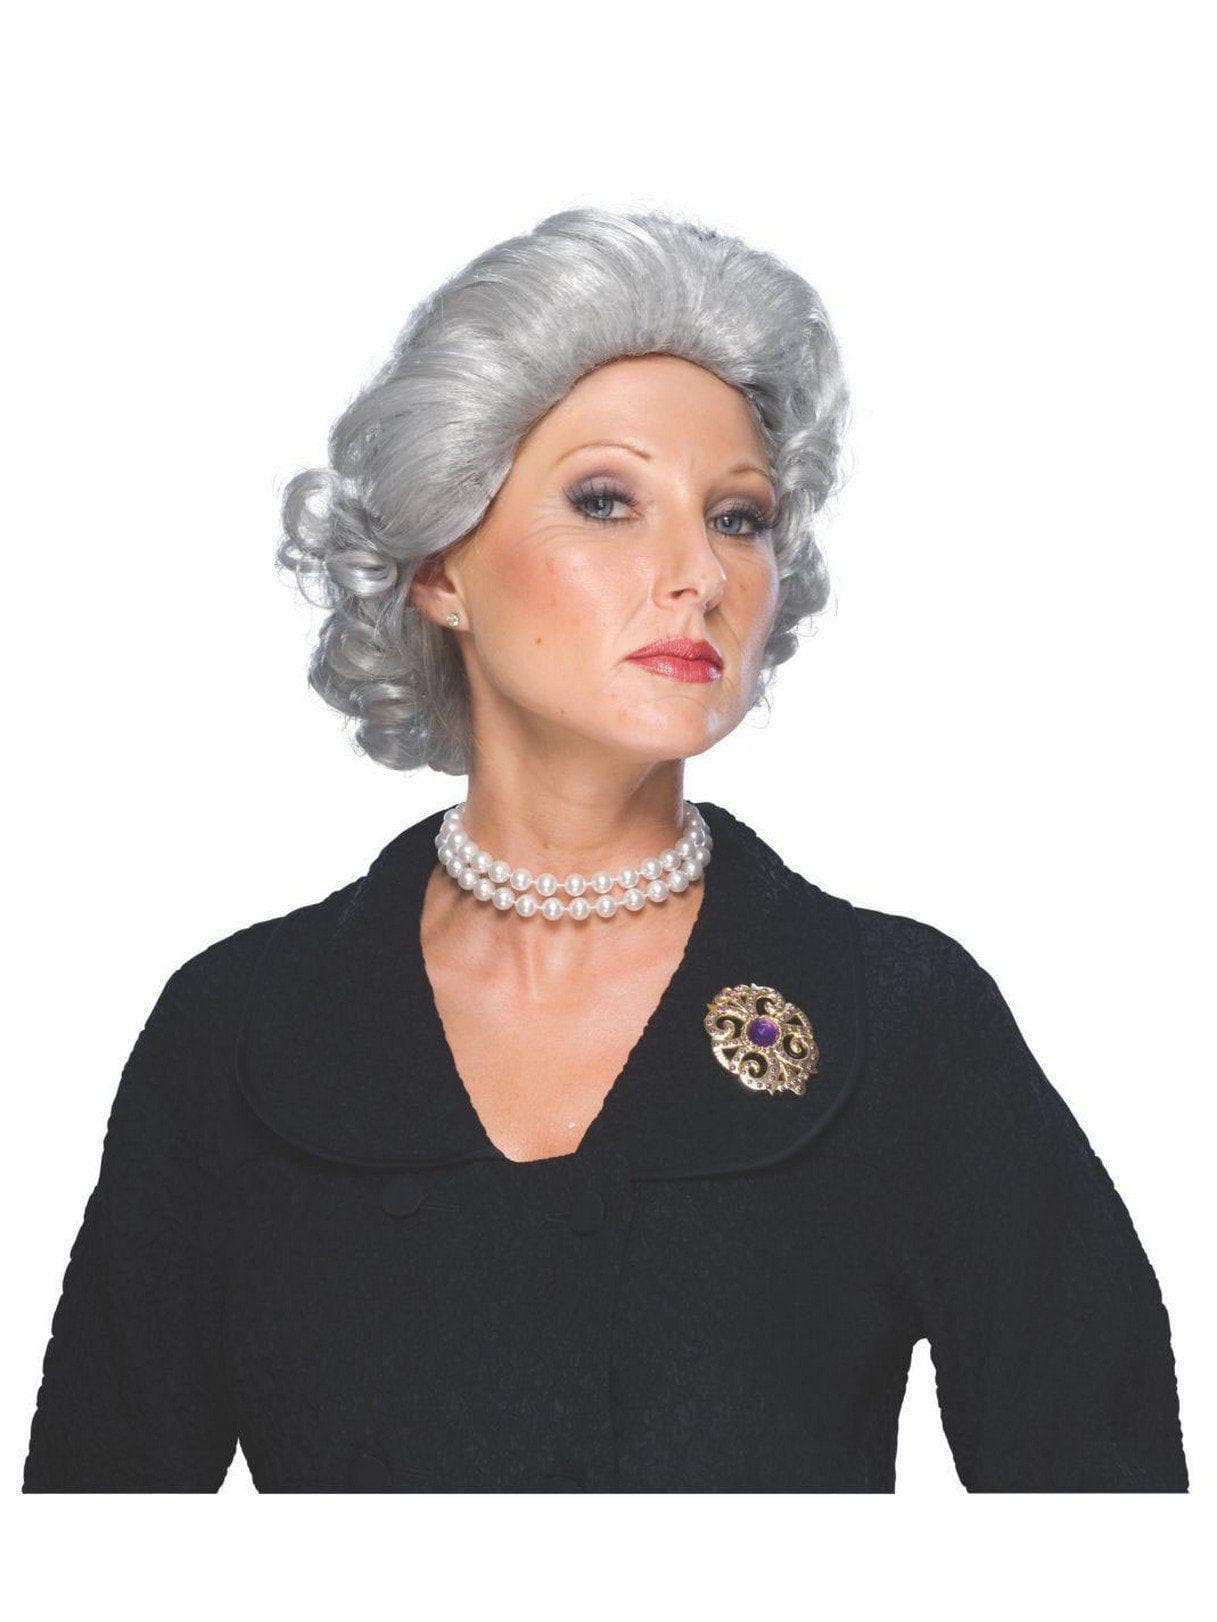 Adult White Queen Wig - costumes.com